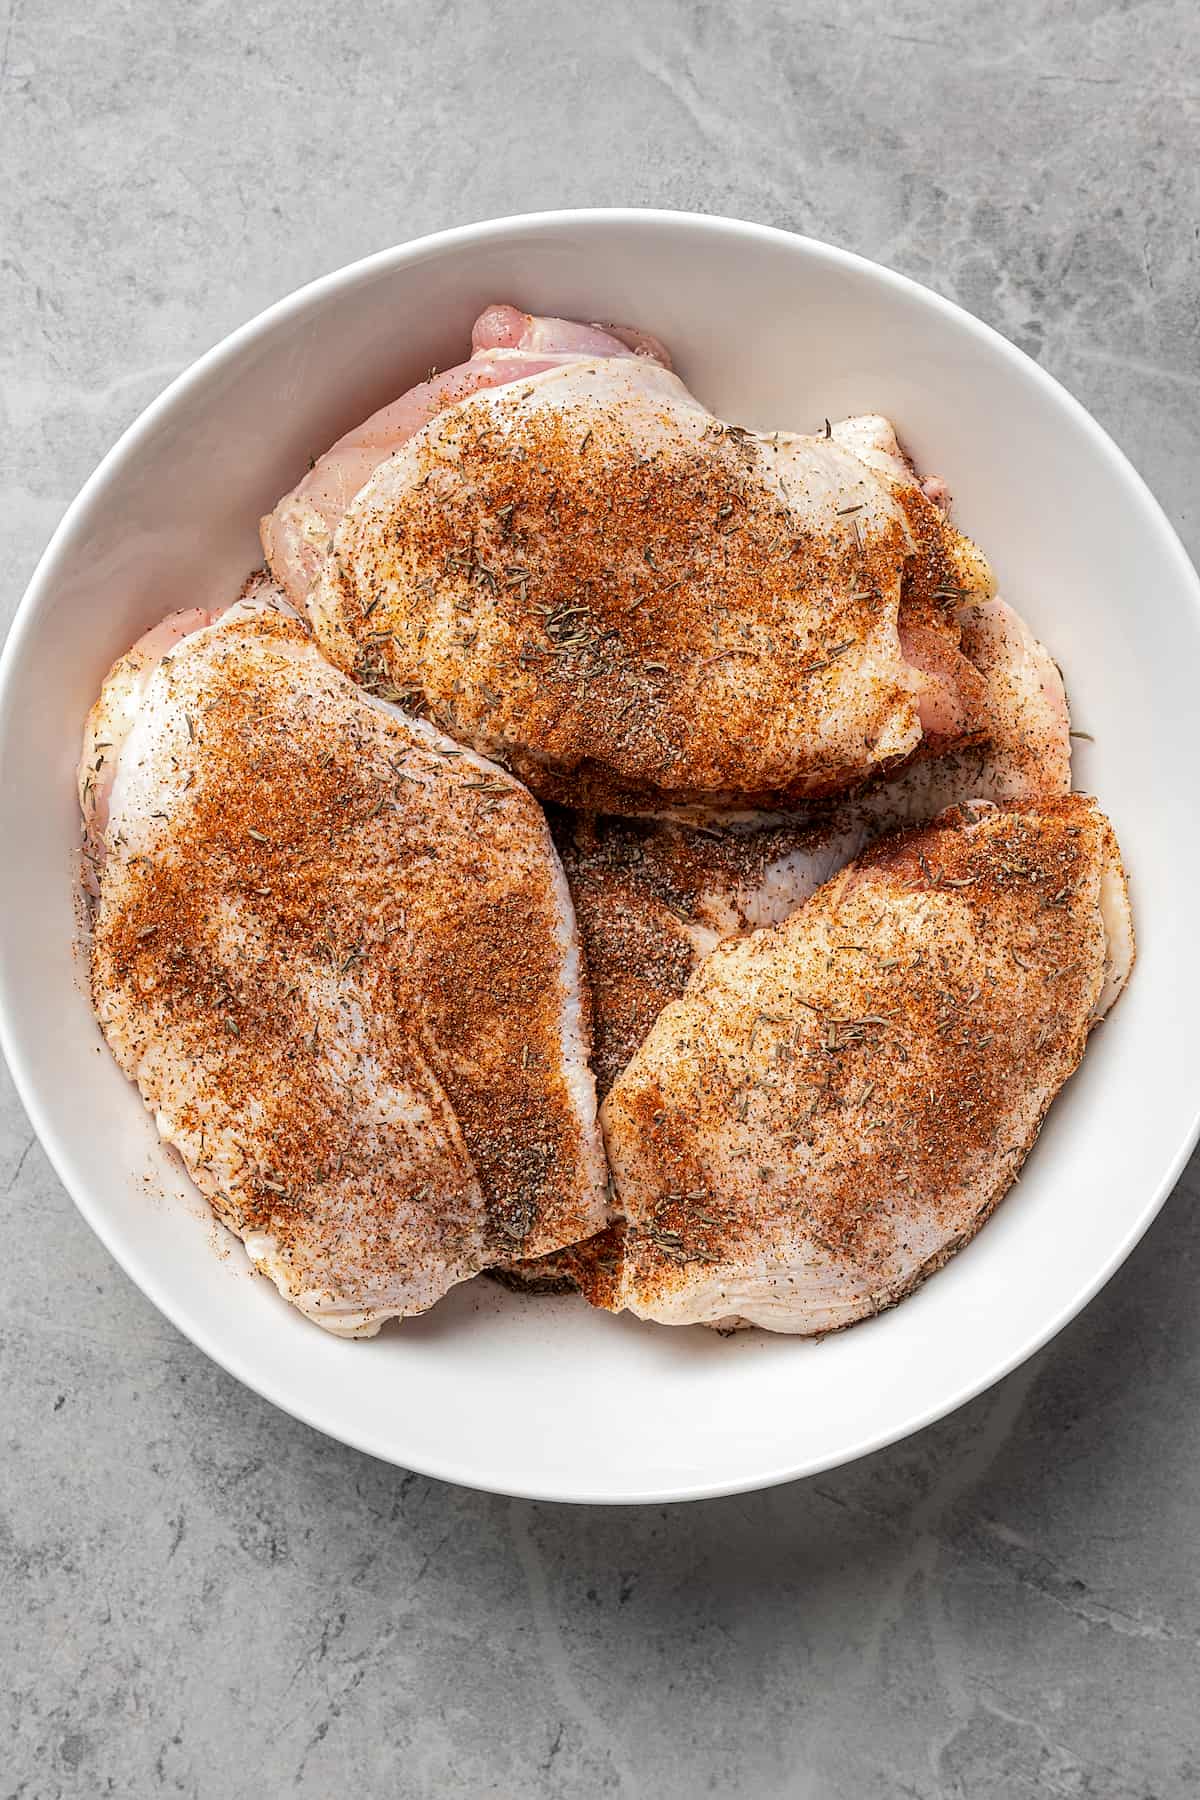 Seasoned chicken, ready to be cooked.